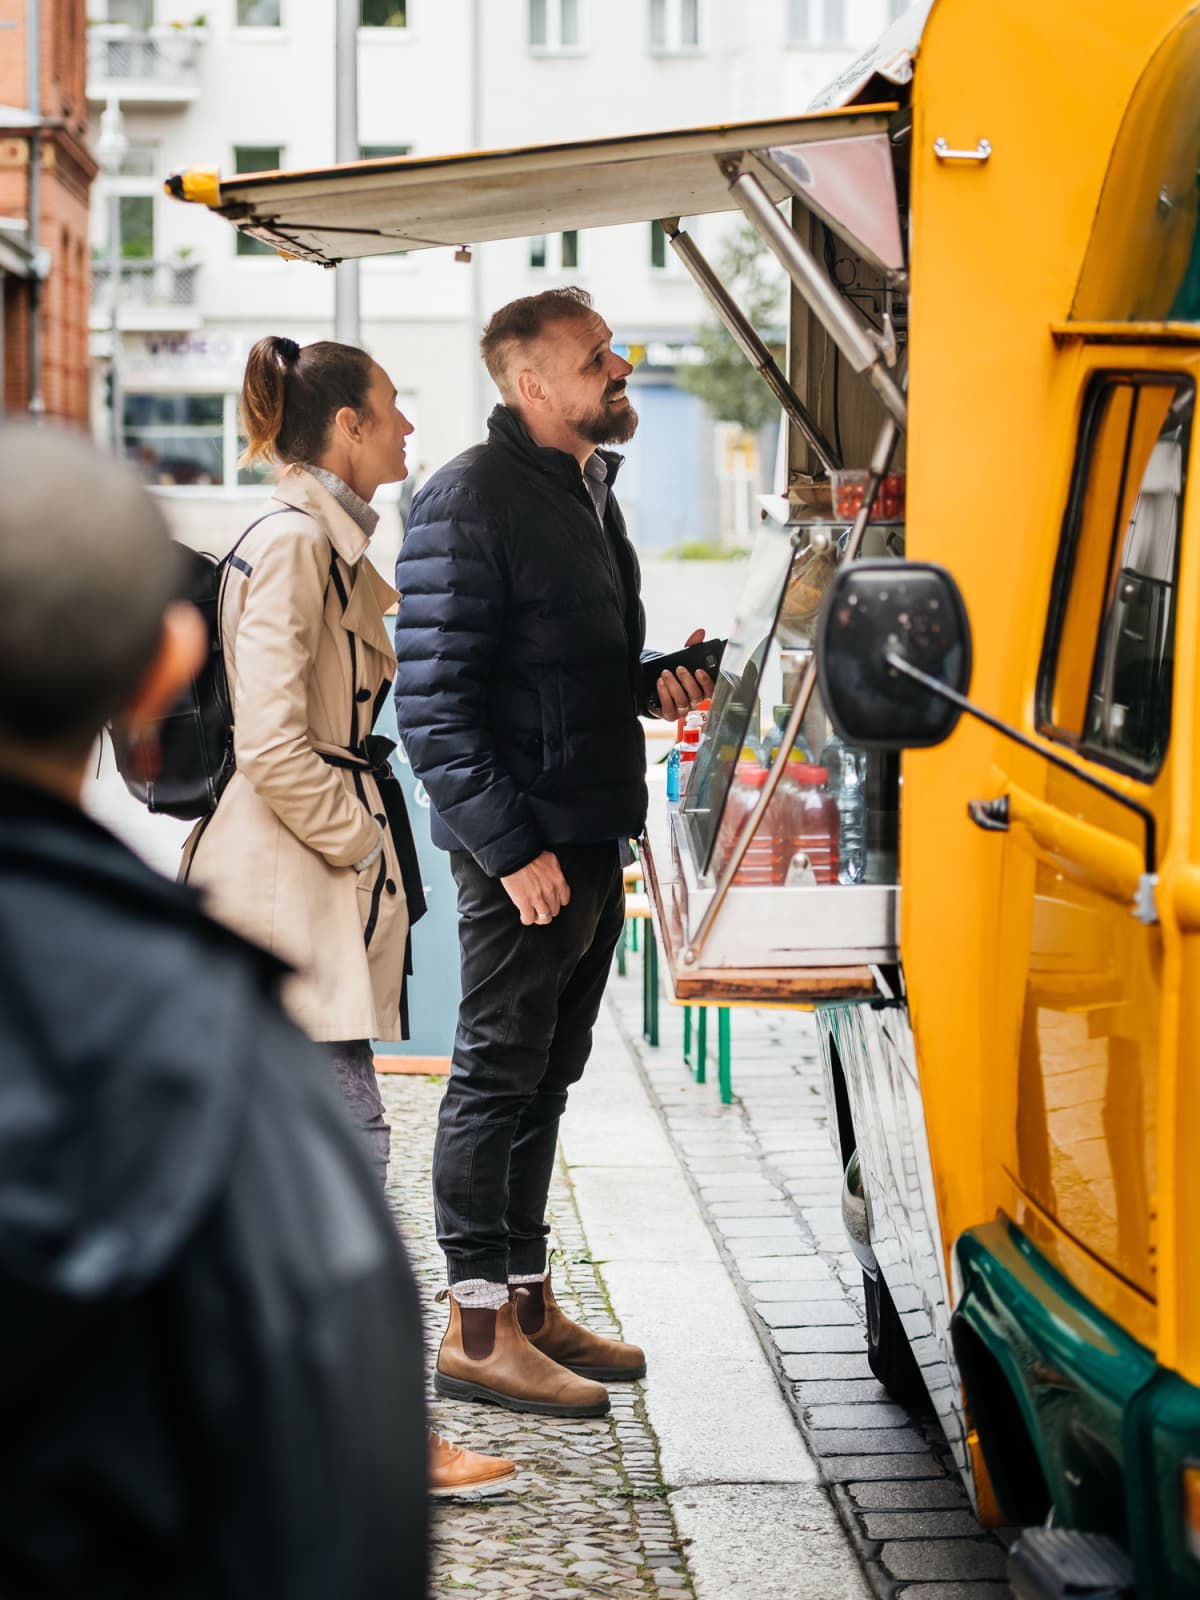 A man ordering something to eat from a food truck after waiting in line in a city street